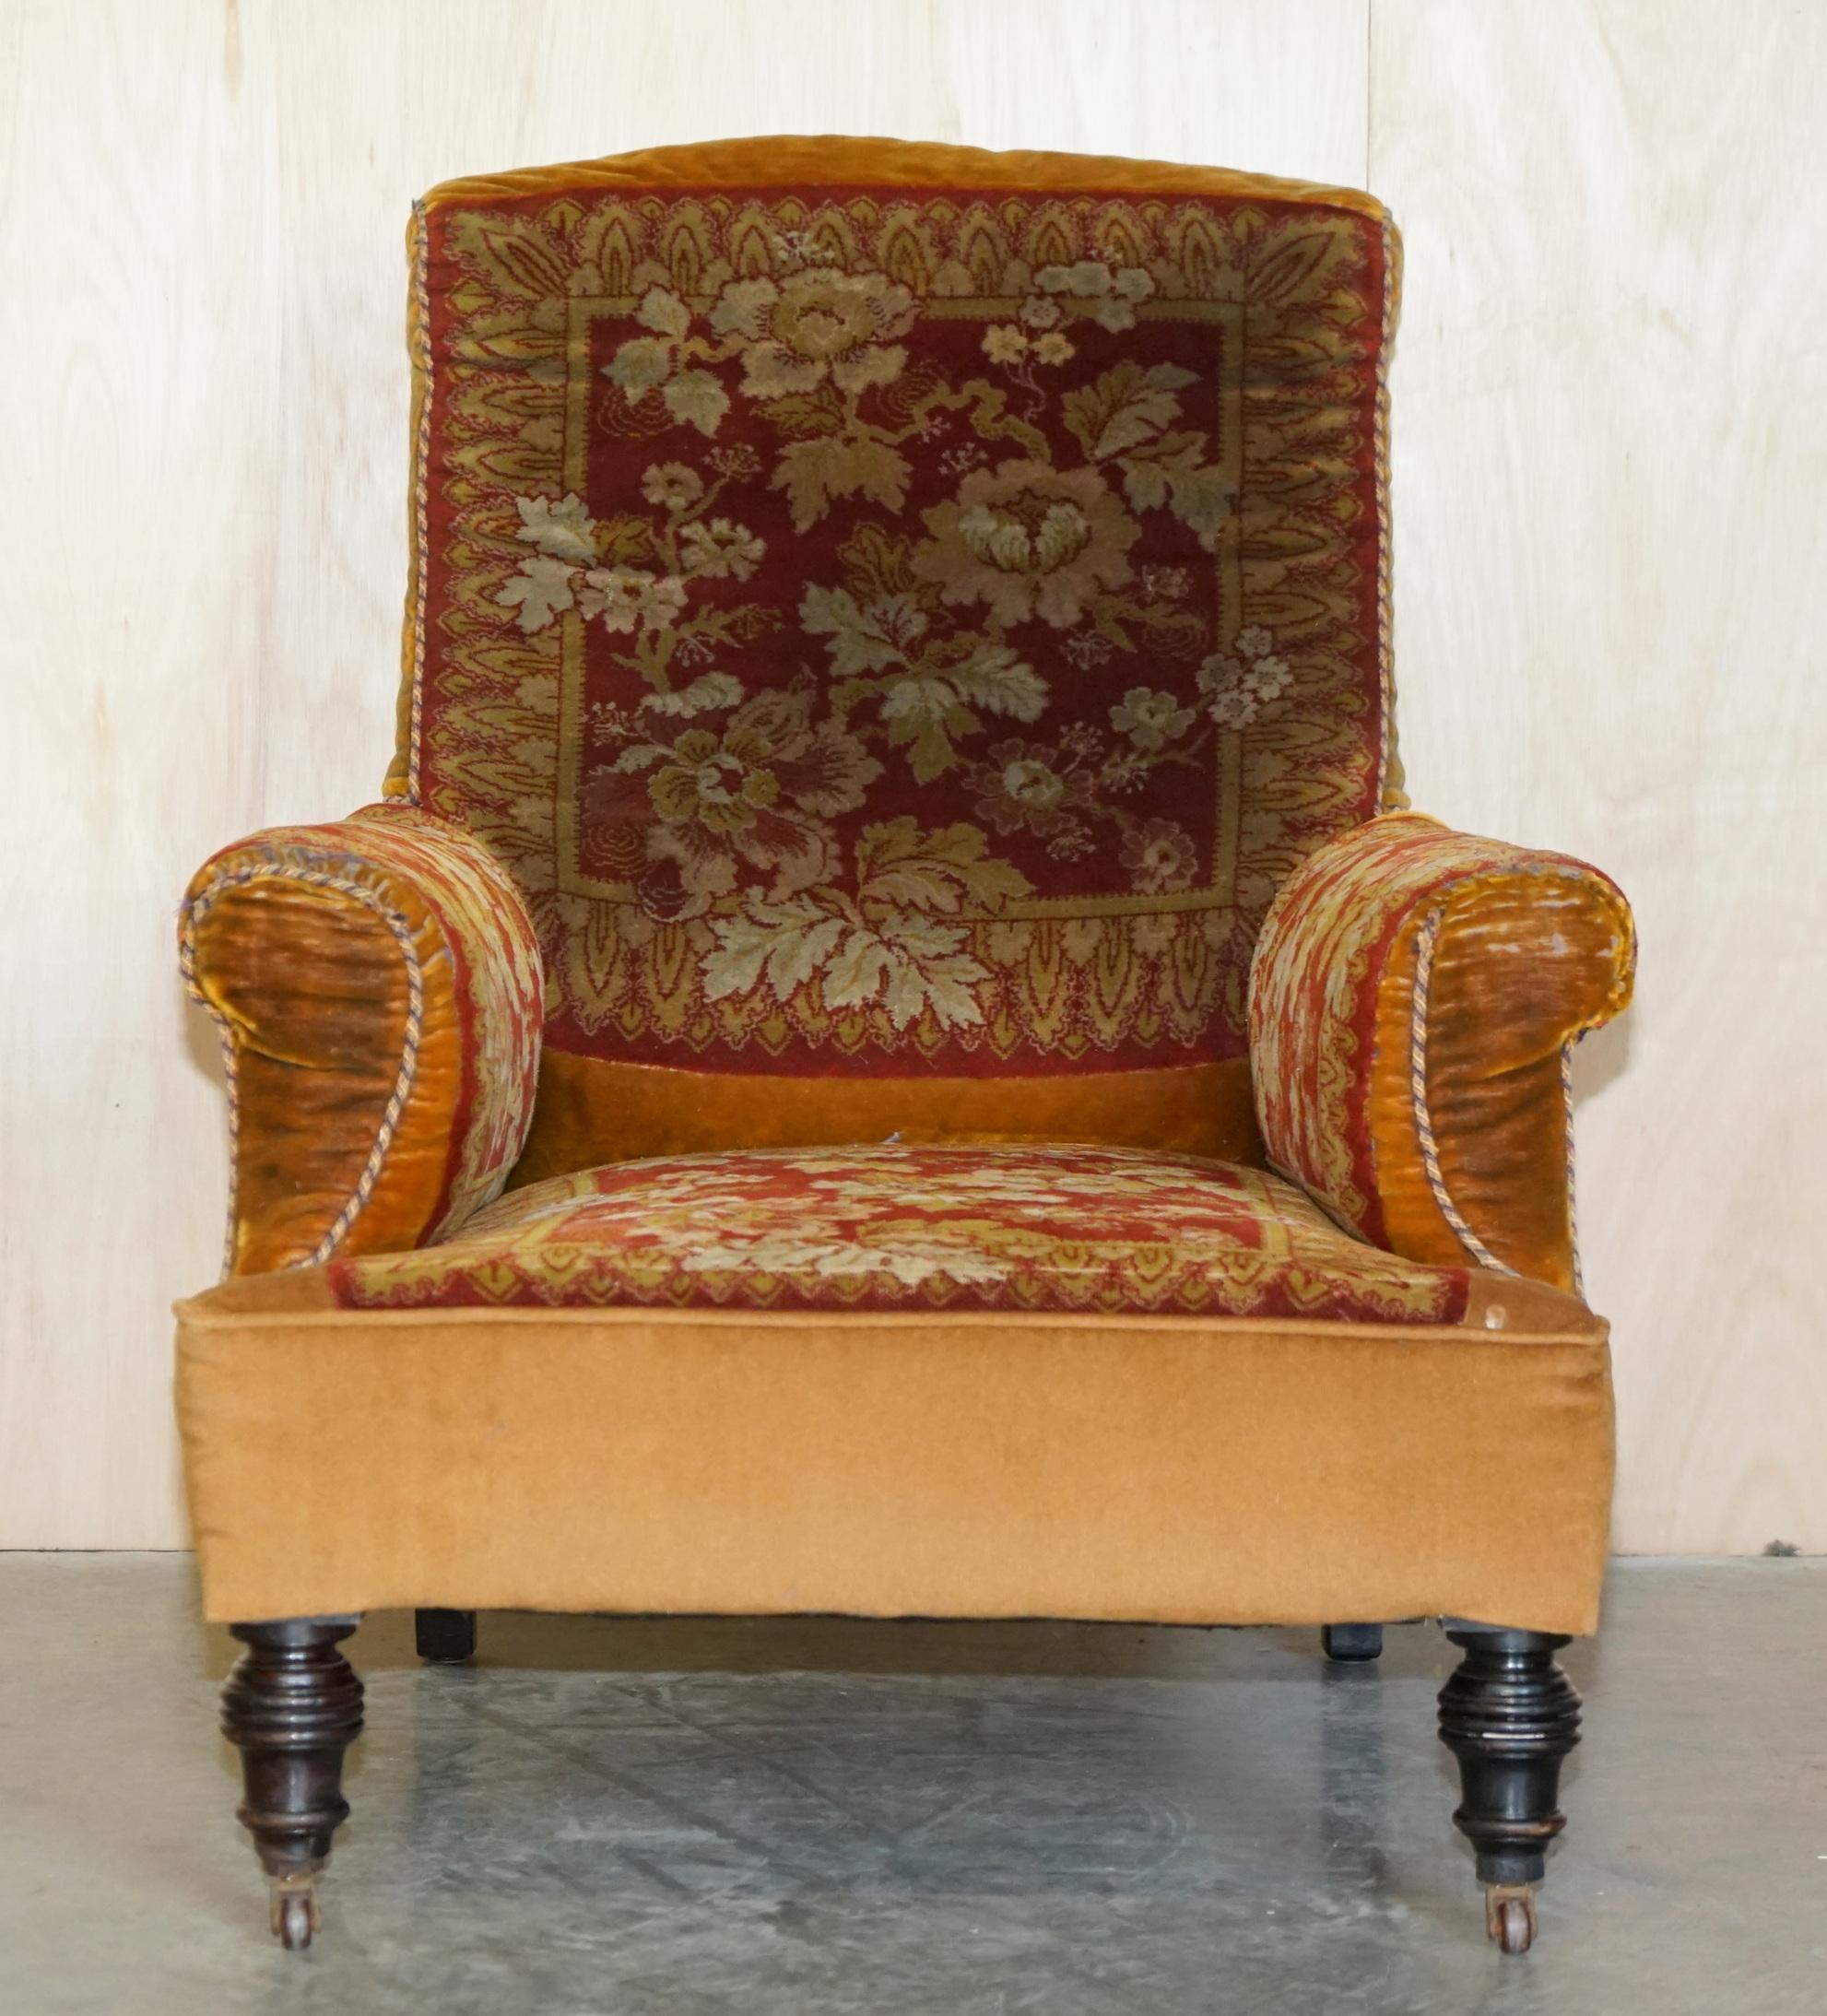 We are delighted to offer for sale this very rare and highly collectable original Victorian mahogany framed country house club armchair with bordered Turkey Kilim Rug upholstery and porcelain castors in the manner of Howard & Son's 

This armchair